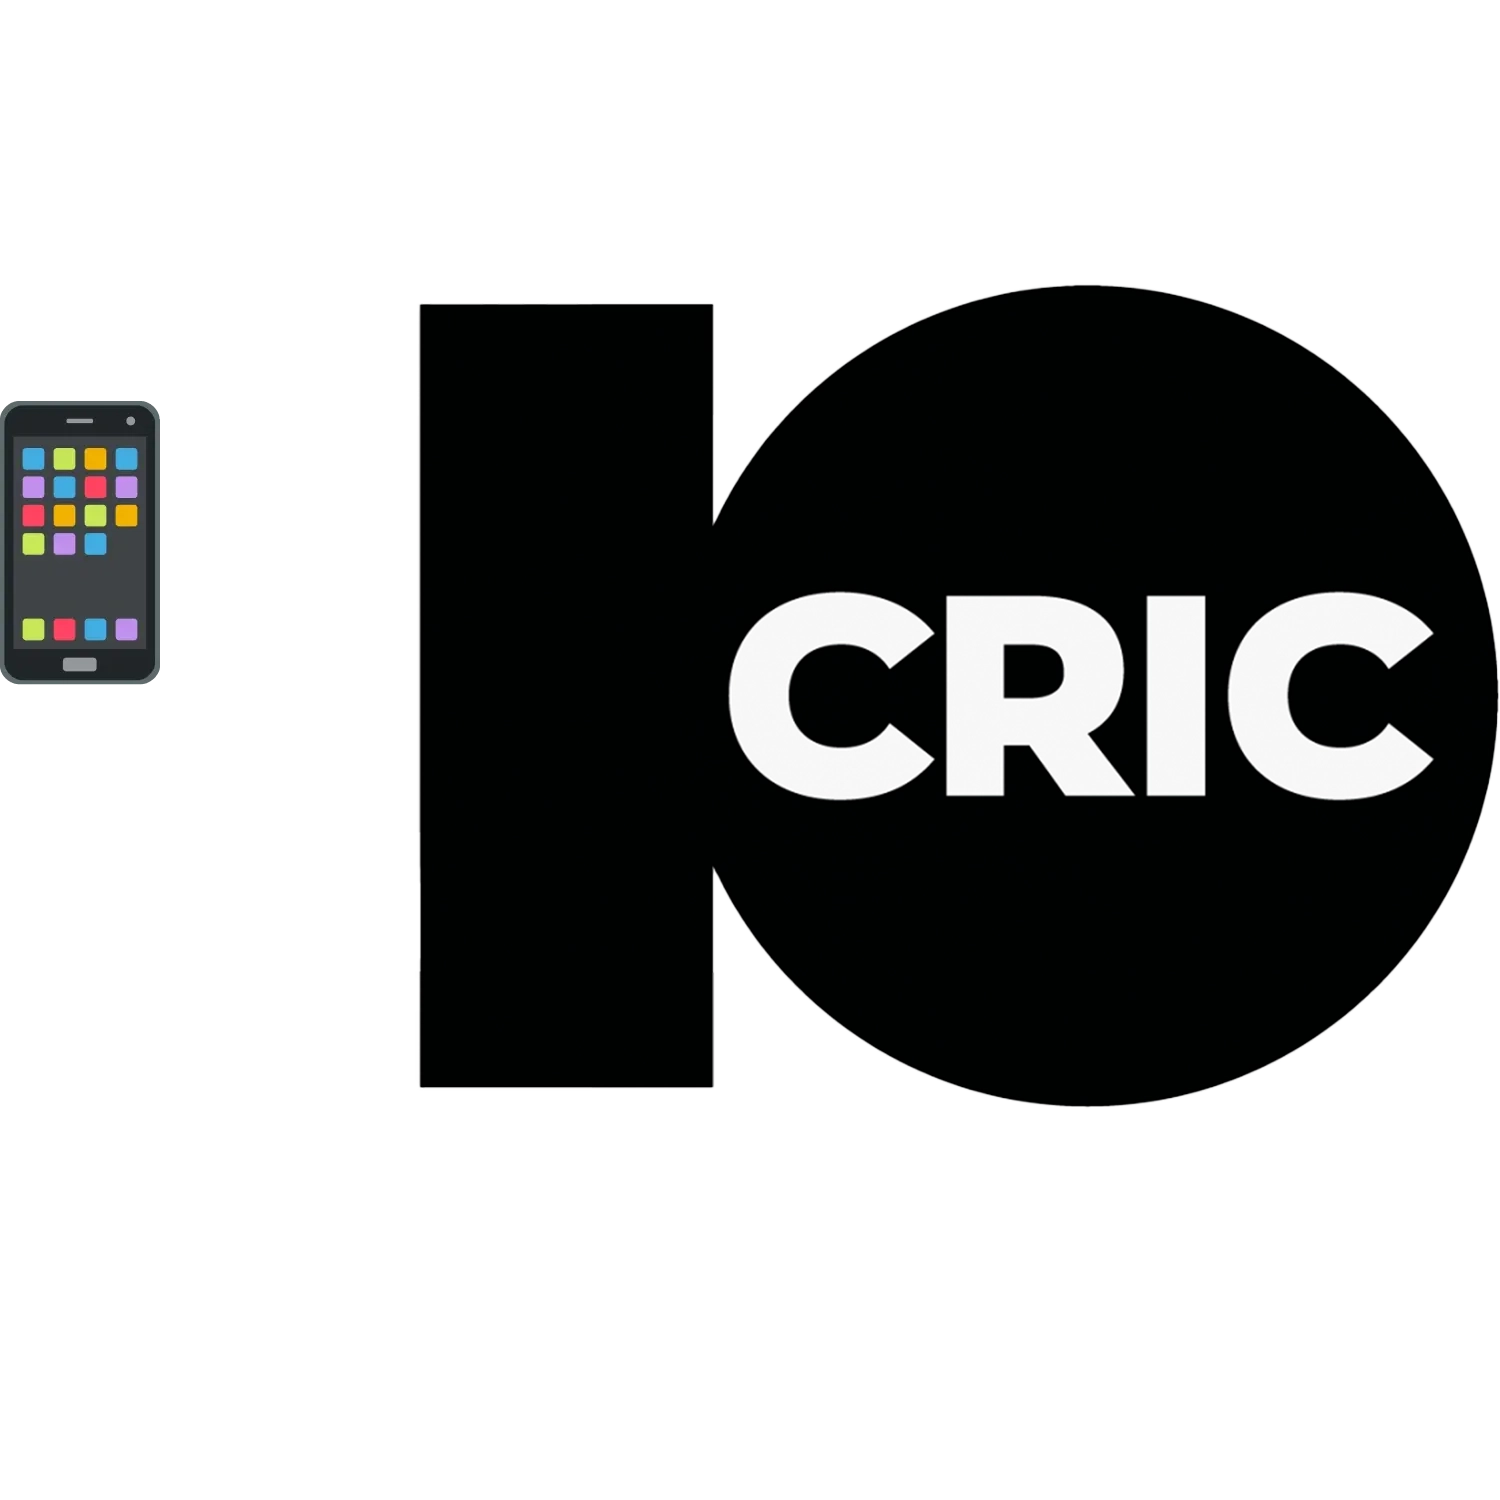 Closing our ranking is 10cric, their high-tech app will be loved by every gambler.